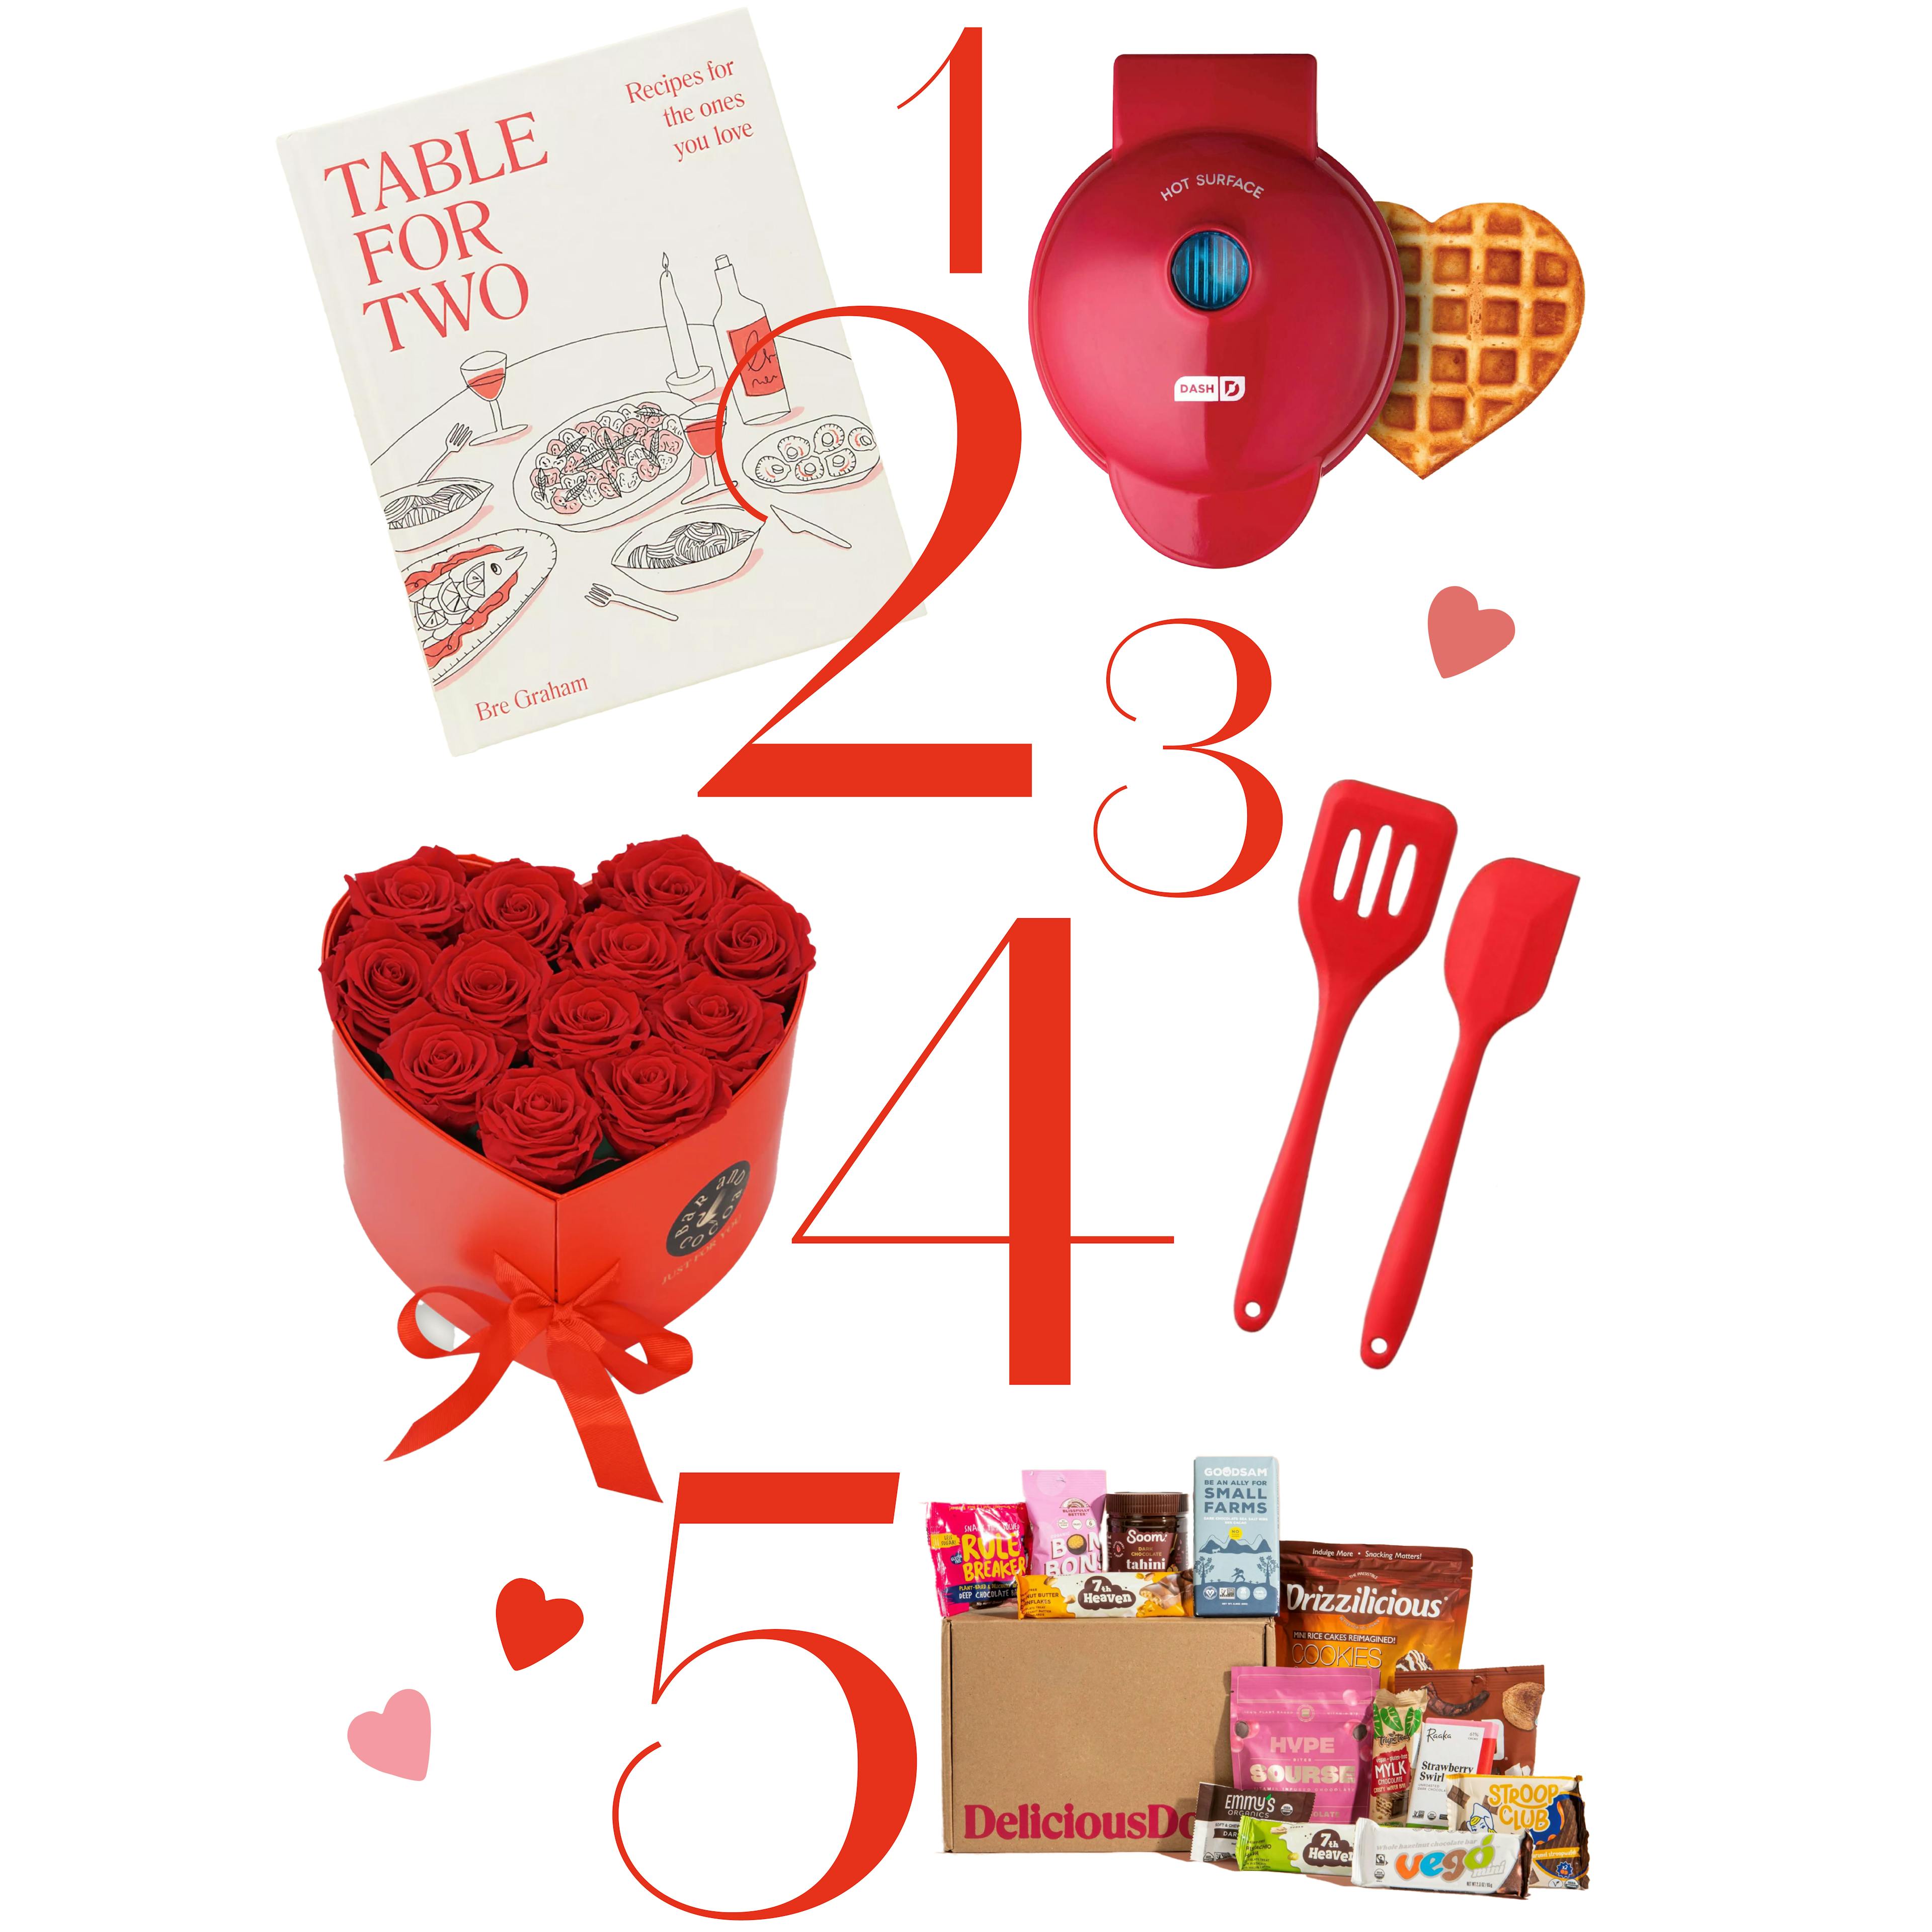 5 Great Gifts to Spread the Love this Valentine's Day